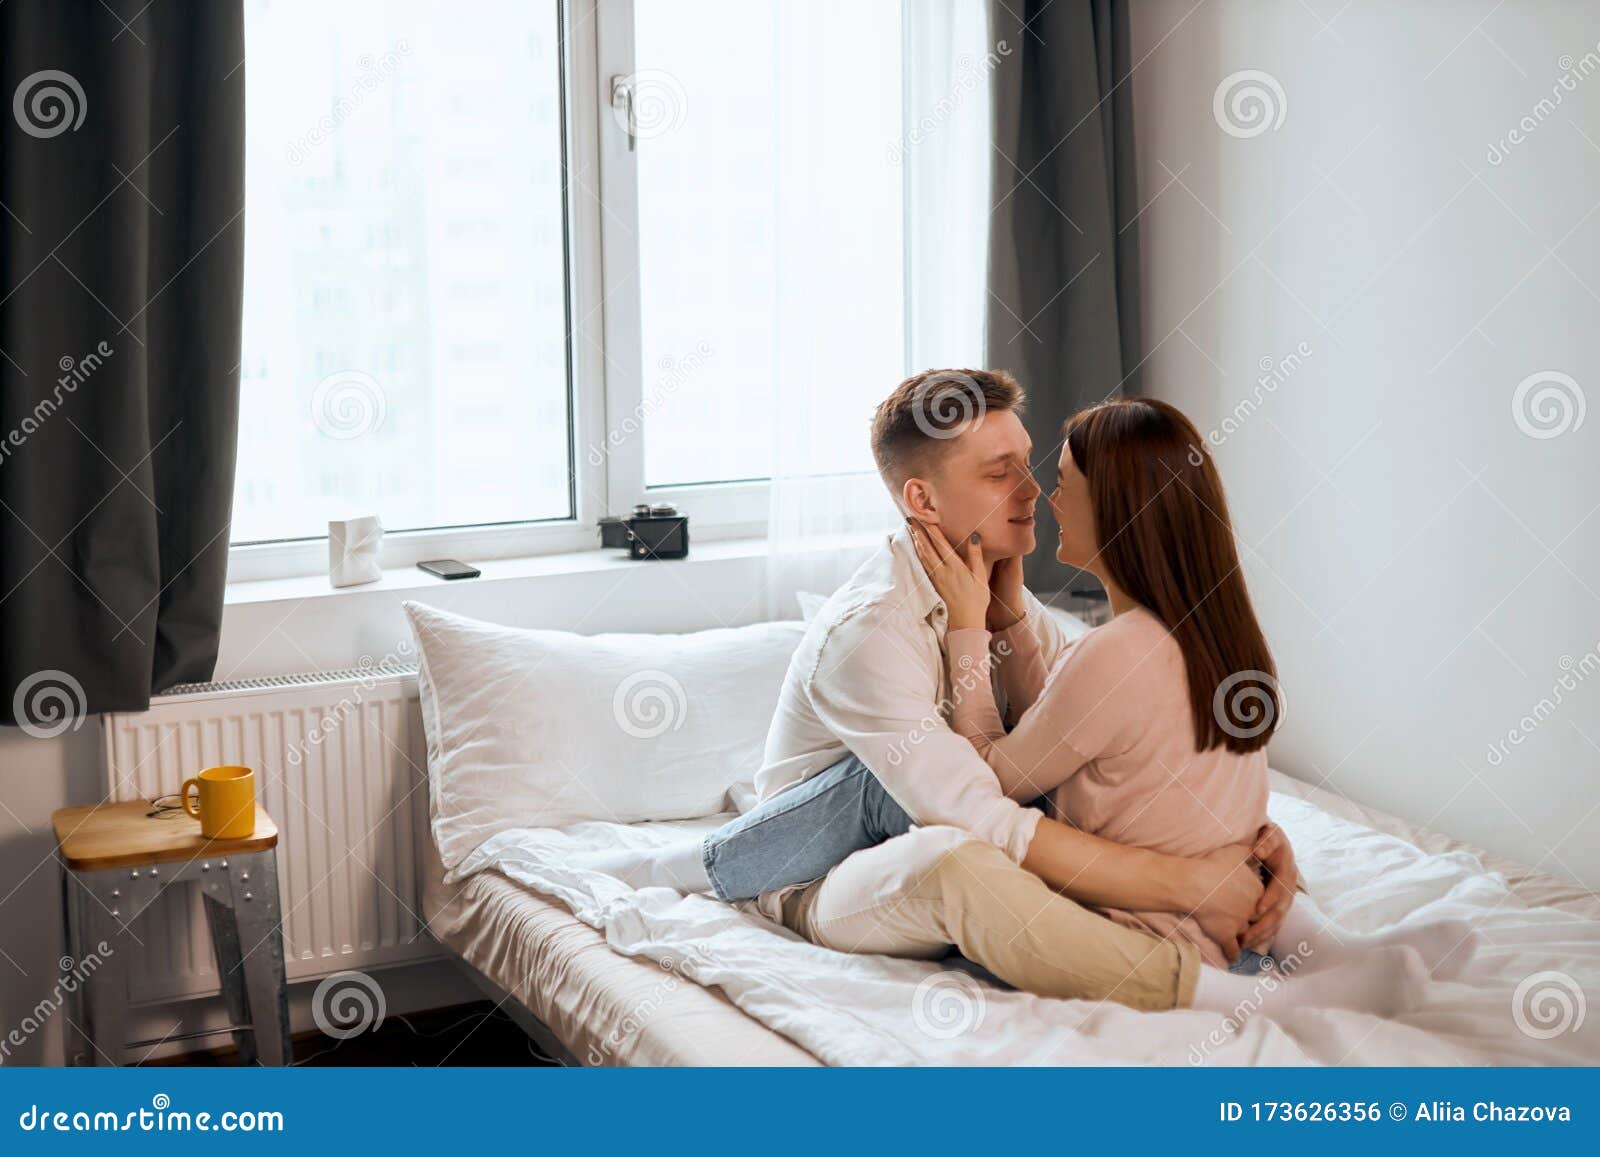 Lovely Romantic Man and Woman Going To Kiss, Look at Each Other As ...